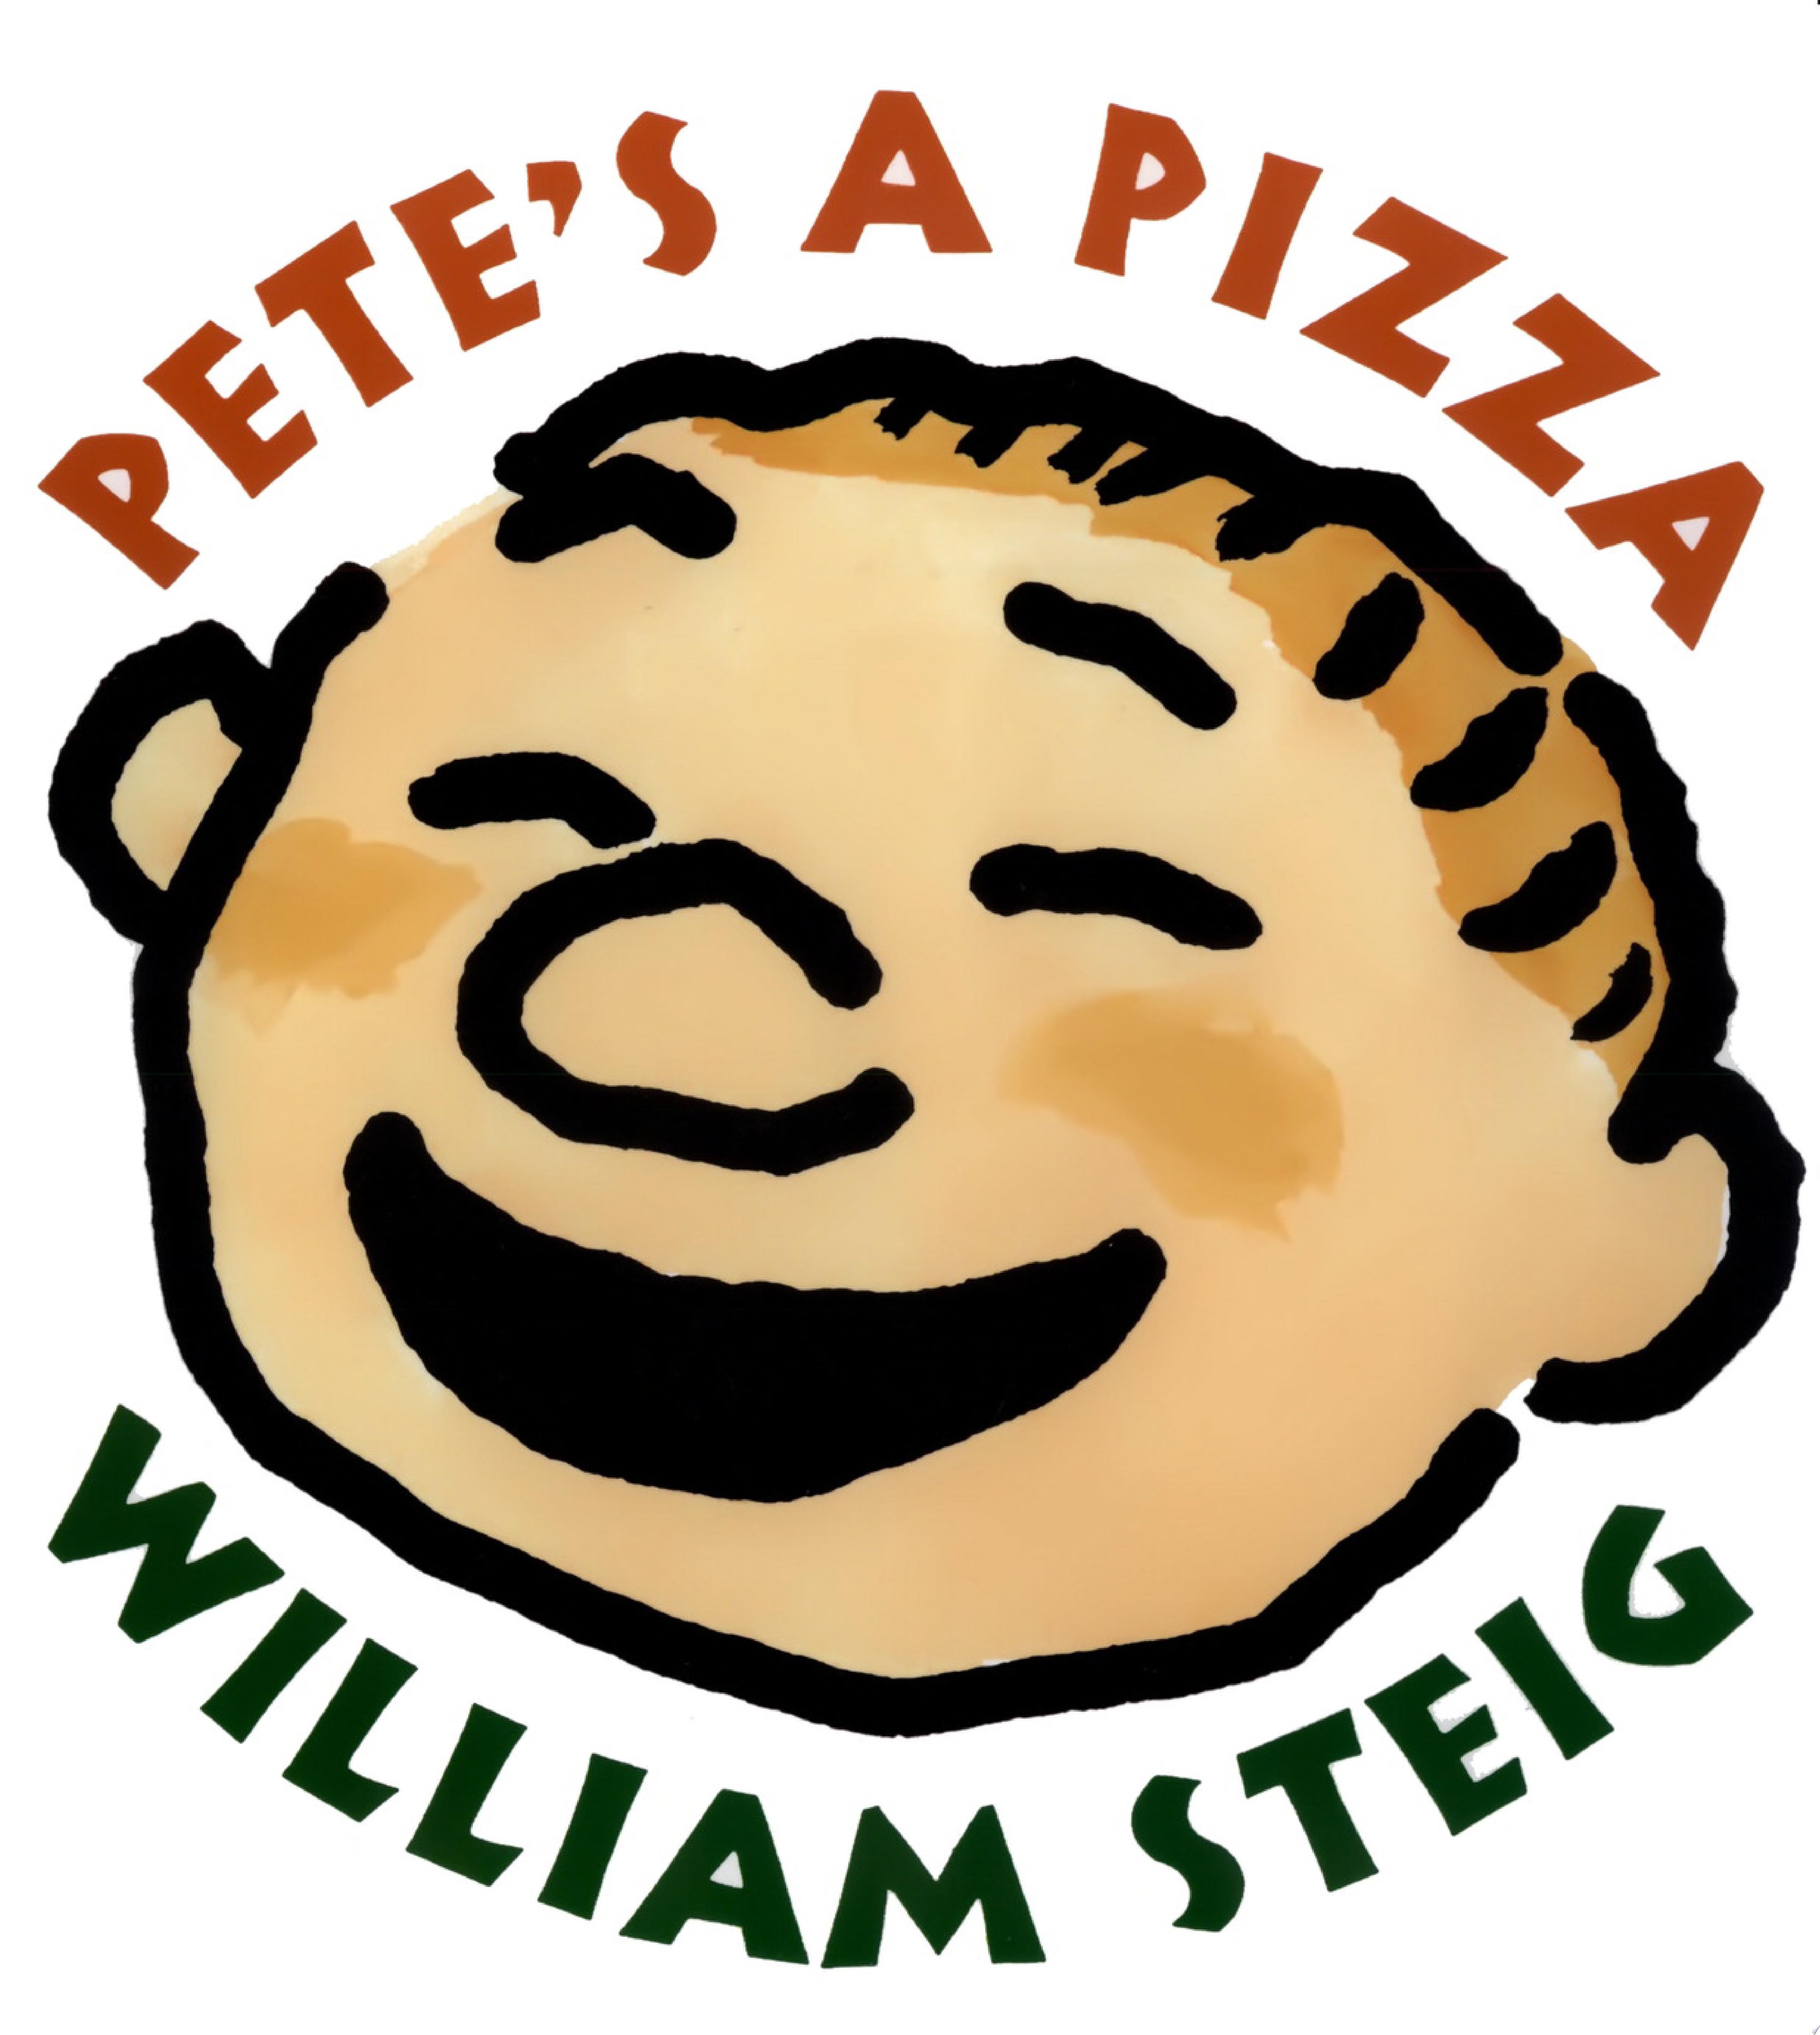 Image for "Pete's a Pizza"